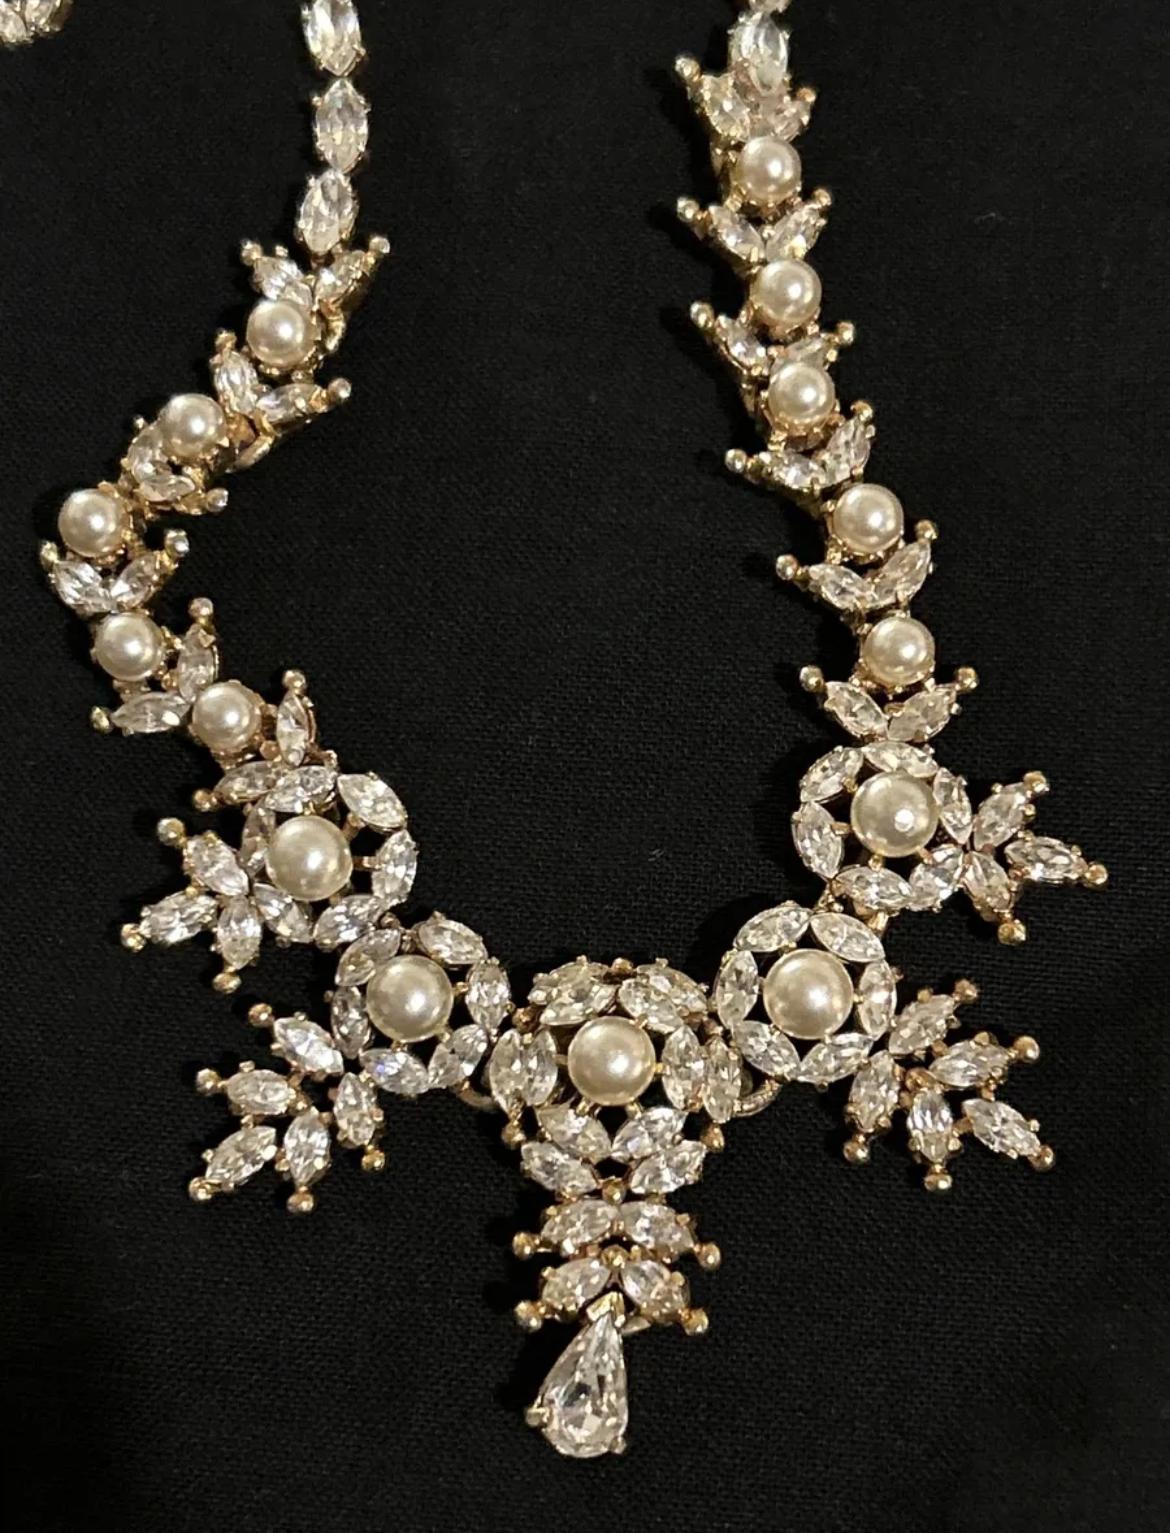 
A absolutely beautiful necklace with clear crystal and faux pearls from Christian Dior and Mitchel Maer.

Very collectable piece of vintage 1950s jewellery.
Signed on the plaque Christian Dior Mitchel Maer. The plaque has some wear. See photos for